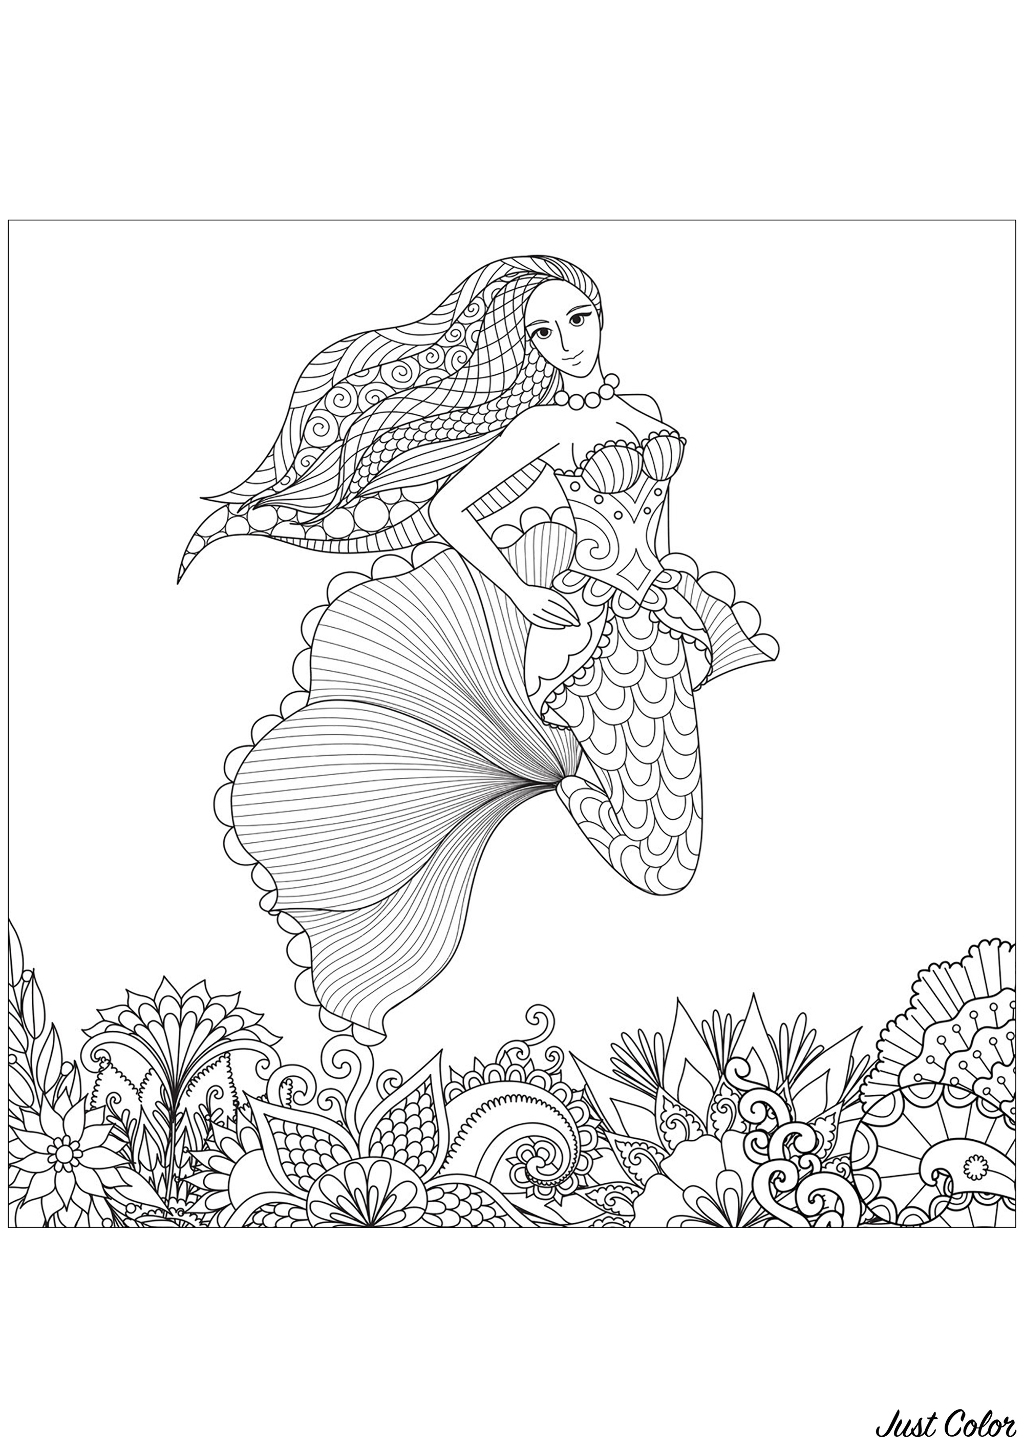 Pretty mermaid with beautiful patterns in her hair, and seabed drawn with Zentangles